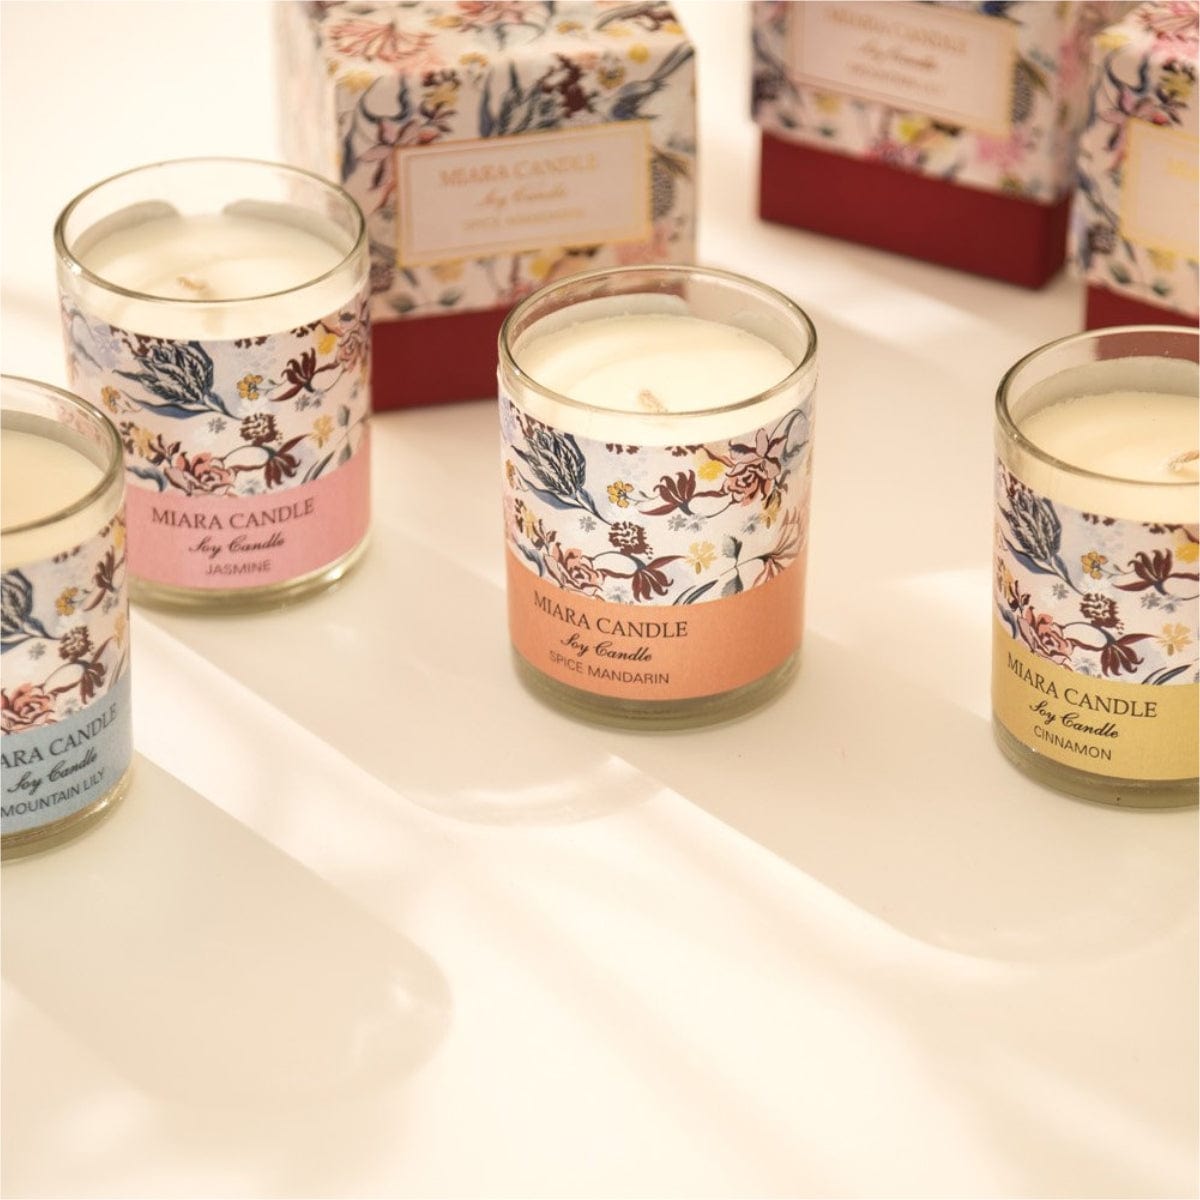 Gifts of Love Luxurious Soy Wax Miara Candle